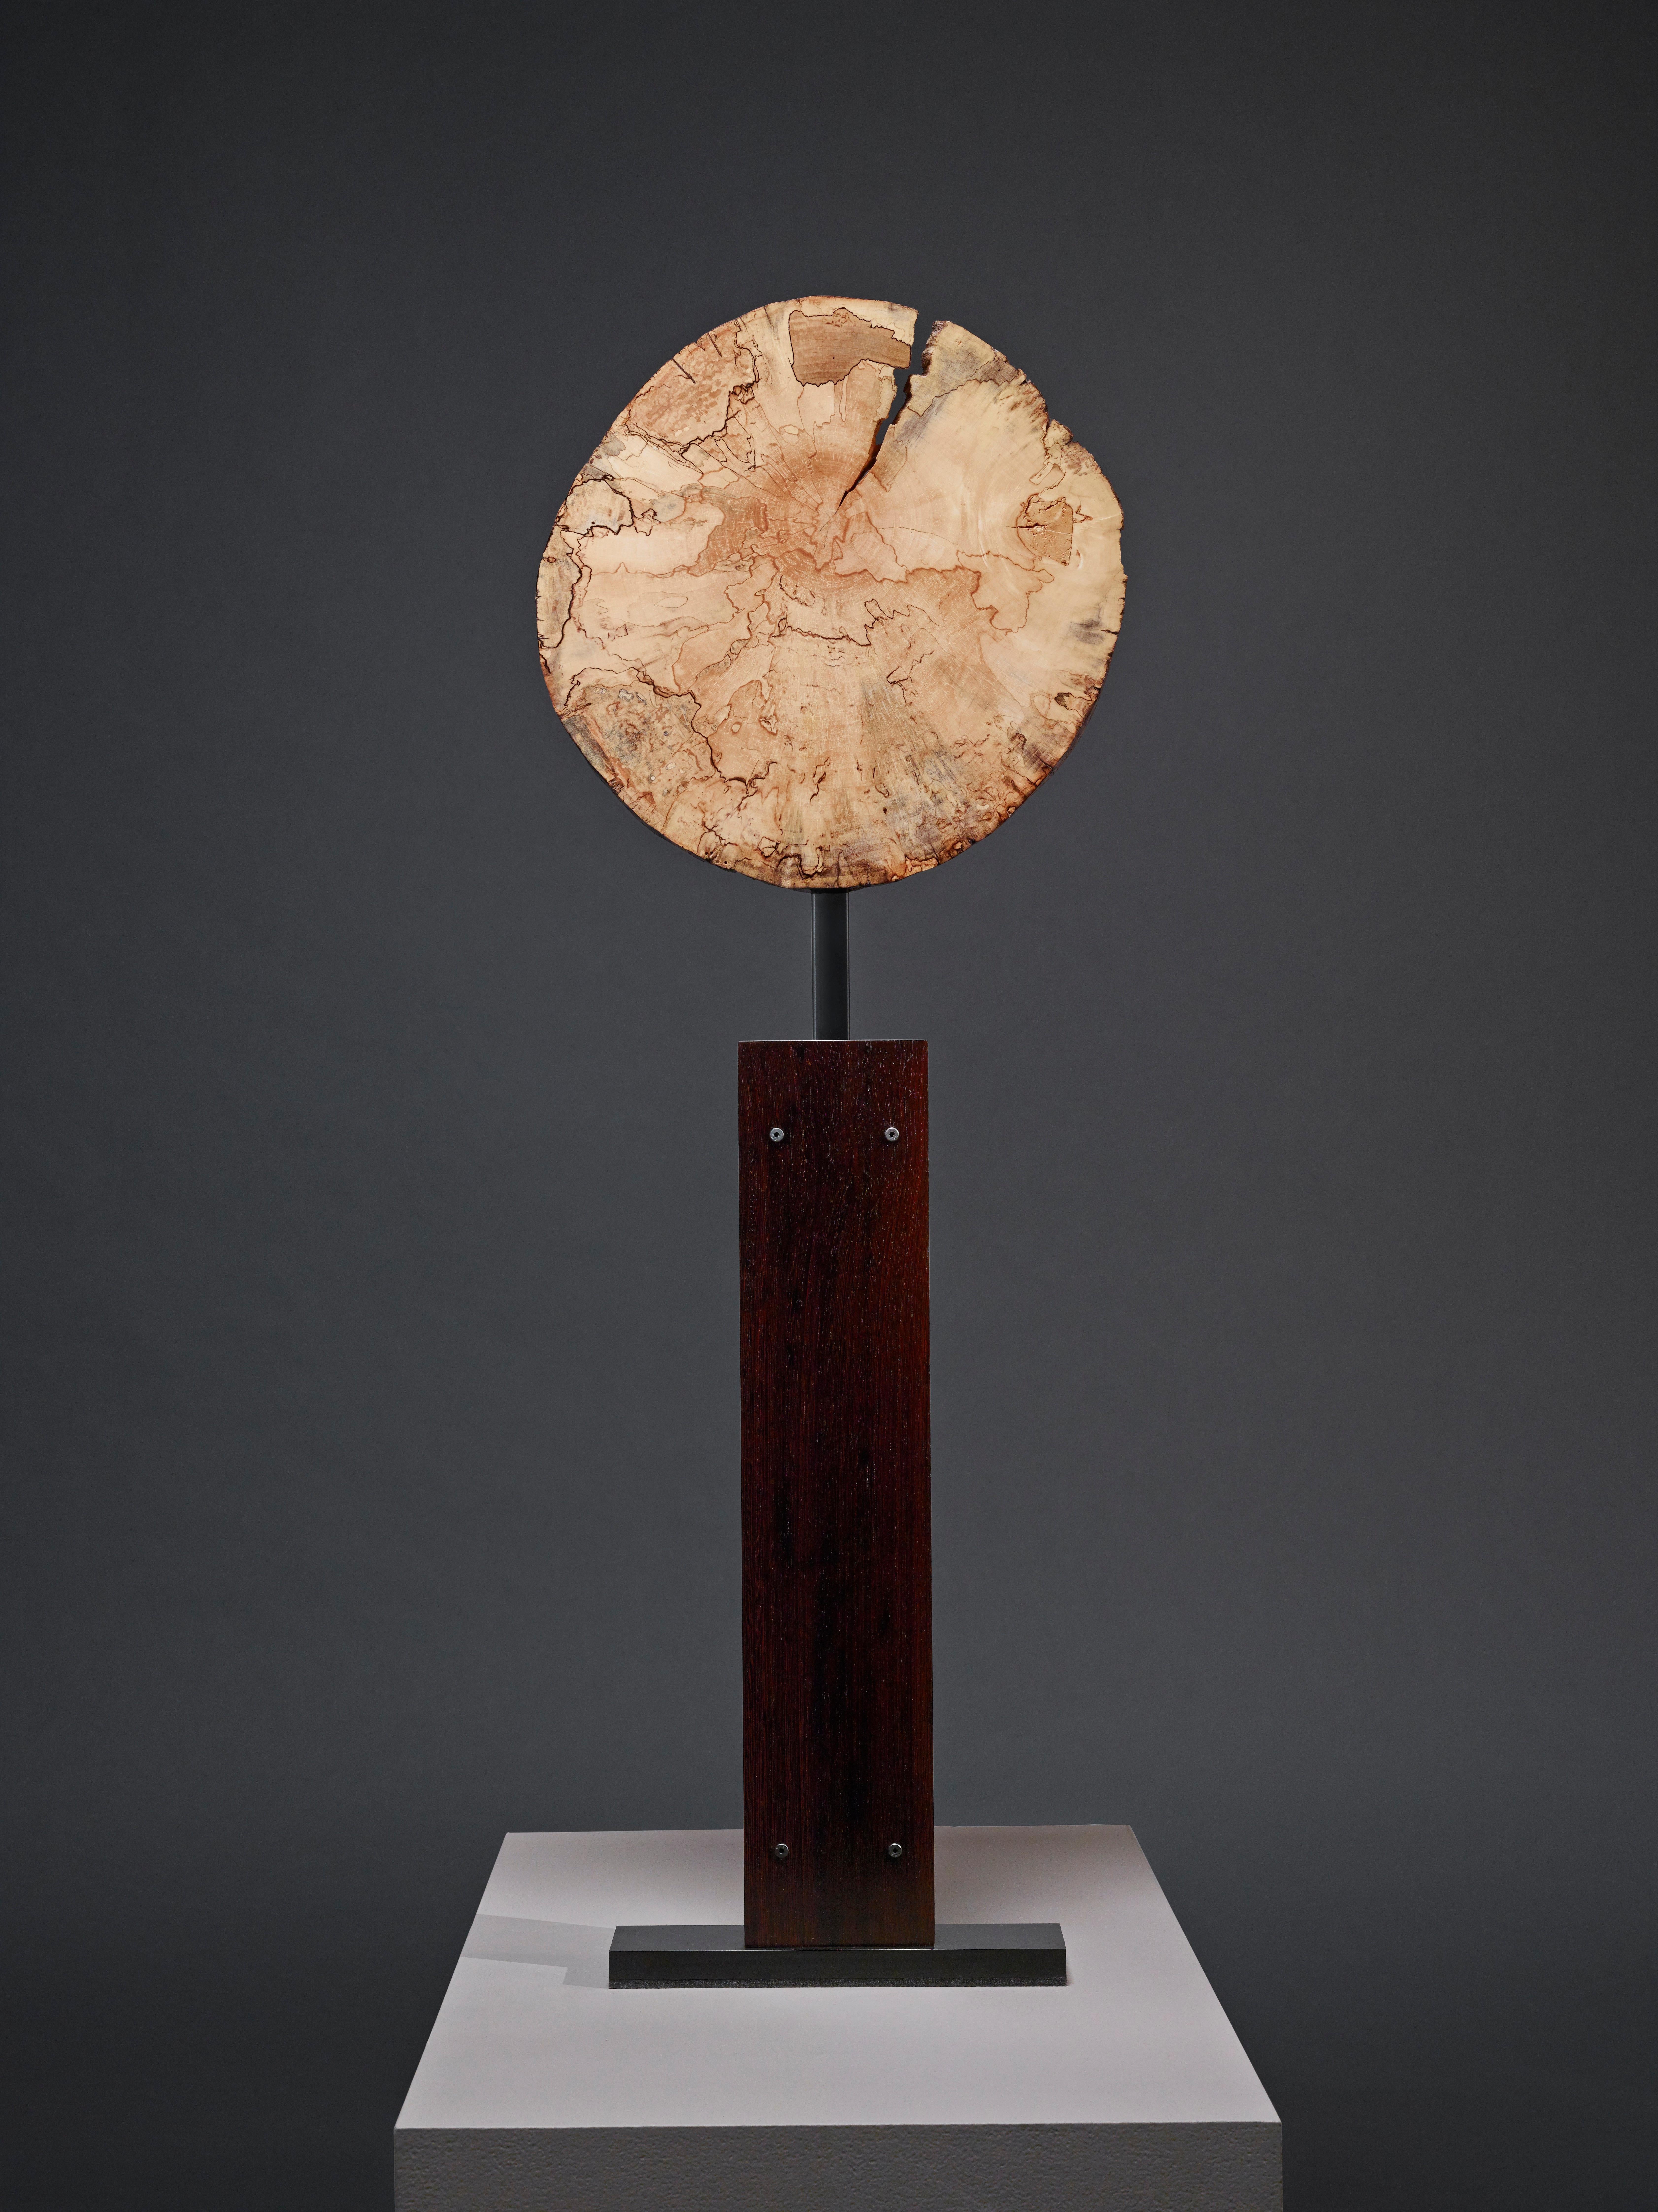 Nautilus sculpture by award-winning artist Michael Olshefski of Primal Modern. Michael brings to life the lines and patterns of an old-world map illustrated by a quill pen on linen. This soft and serene modern organic table sculpture showcases